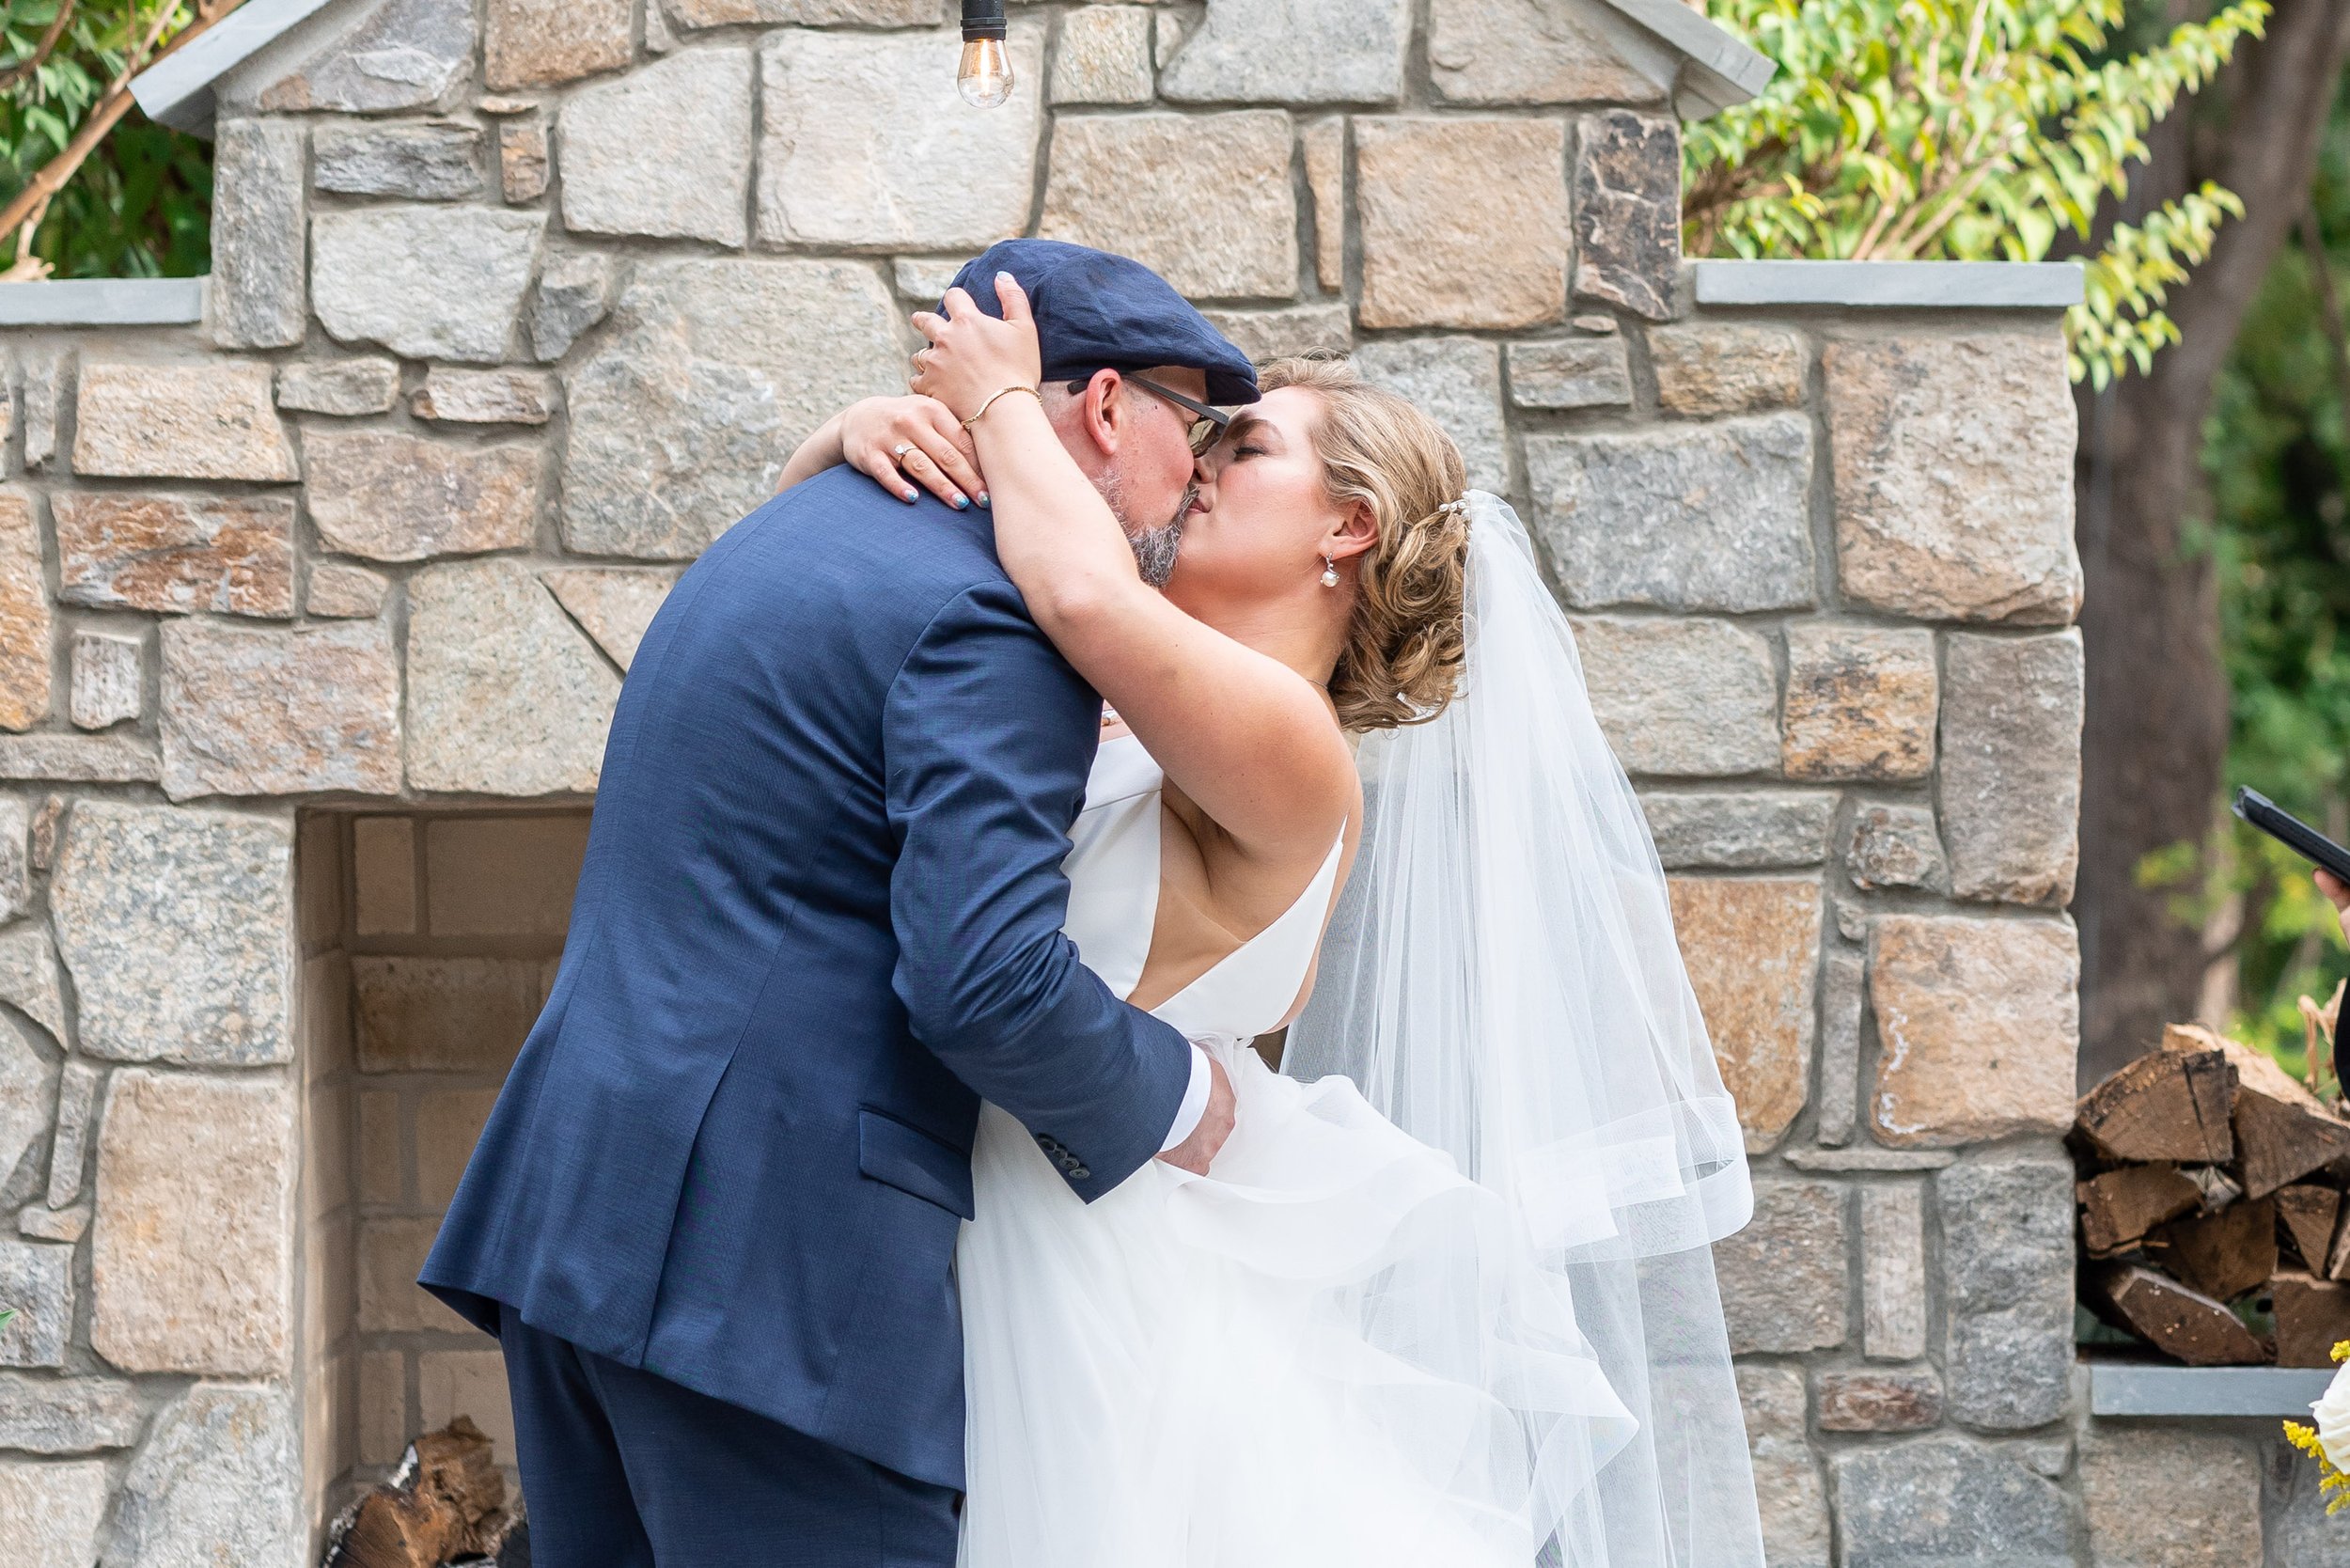 Bride and groom kiss at end of wedding ceremony